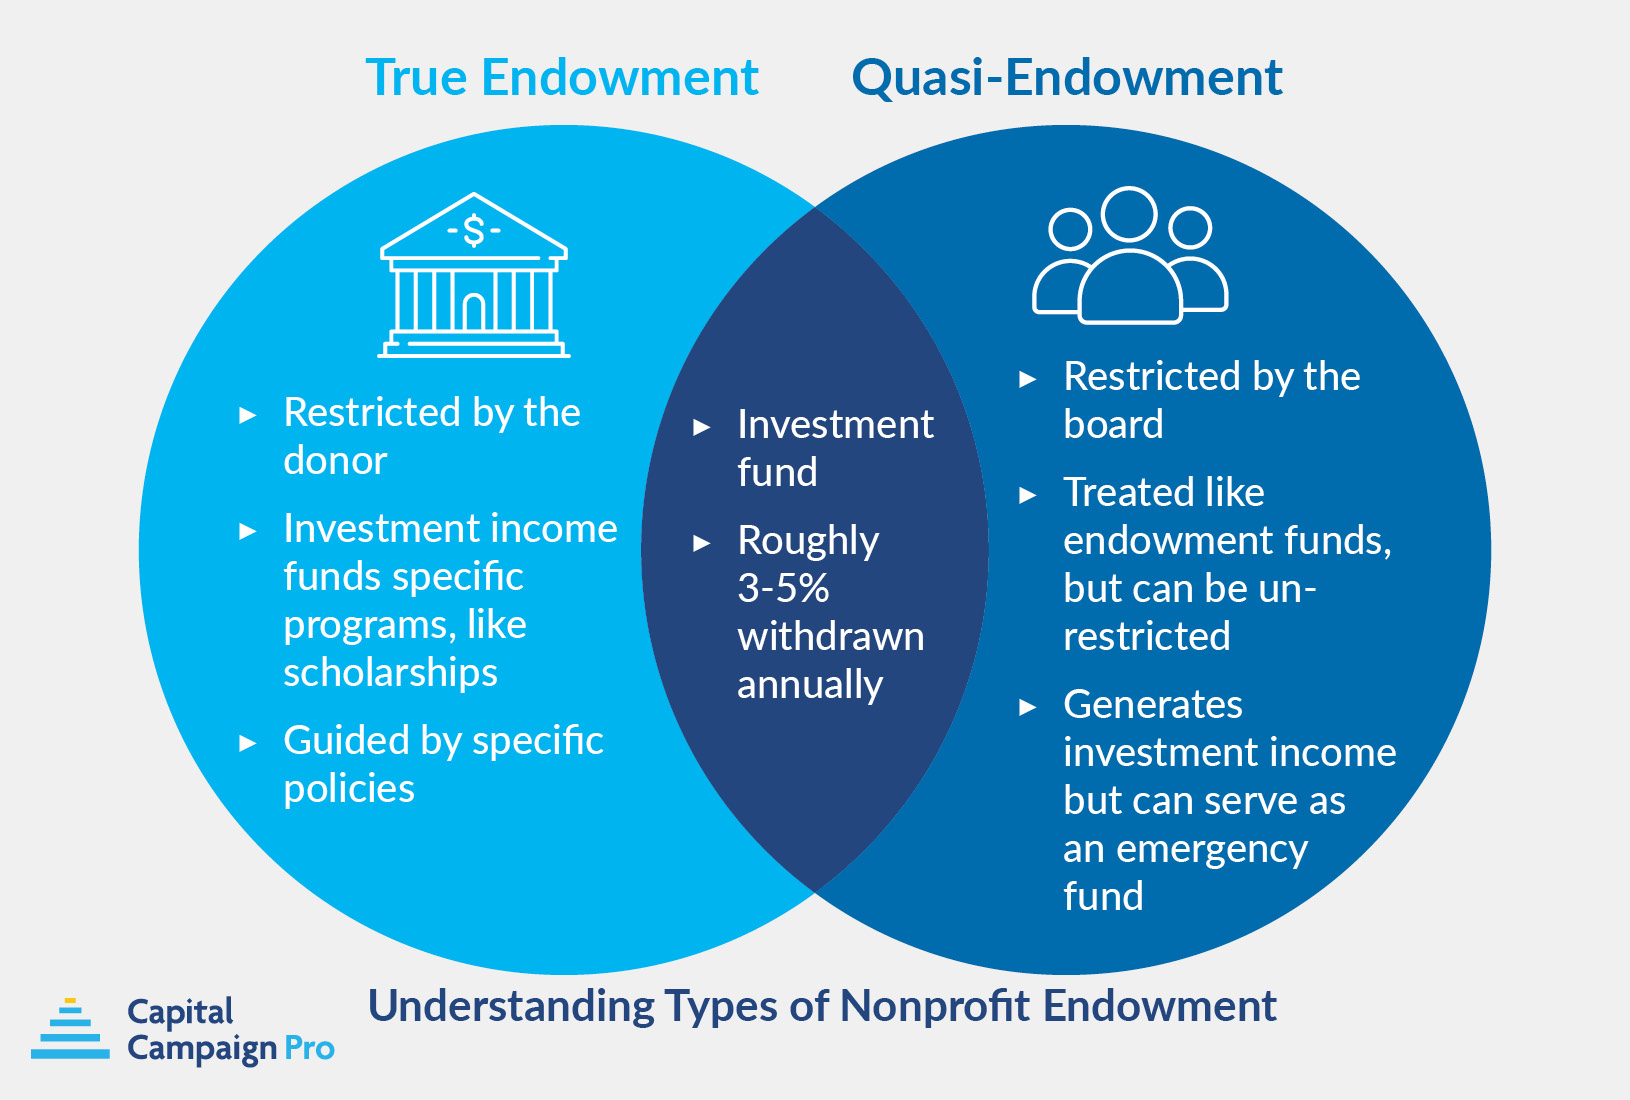 This graphic explains the differences between types of endowment funds, detailed in the text below.